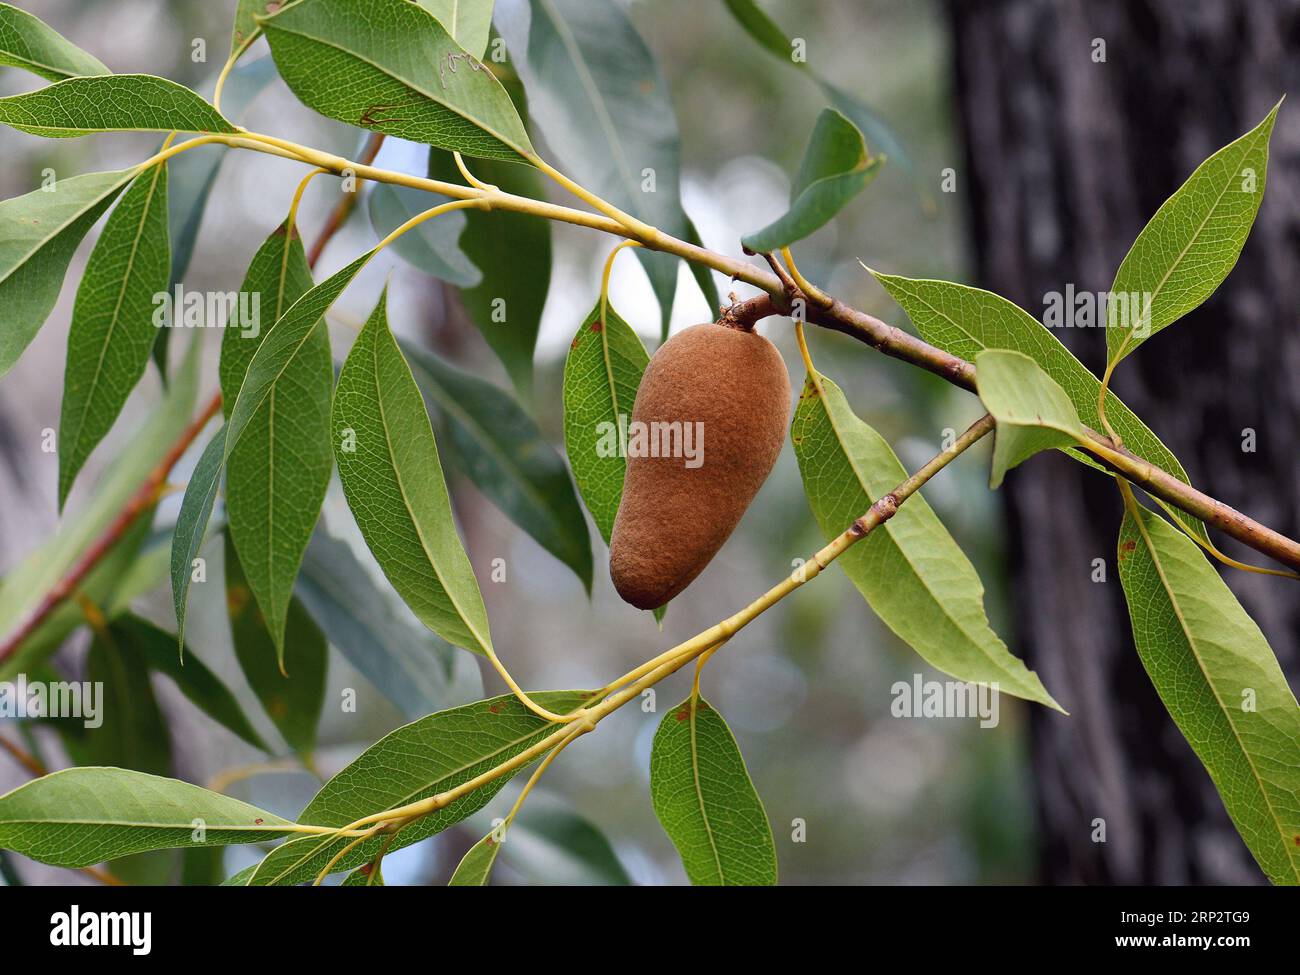 https://c8.alamy.com/comp/2RP2TG9/rust-coloured-velvety-developing-fruit-of-the-australian-native-woody-pear-xylomelum-pyriforme-family-proteaceae-in-sydney-open-sclerophyll-forest-2RP2TG9.jpg